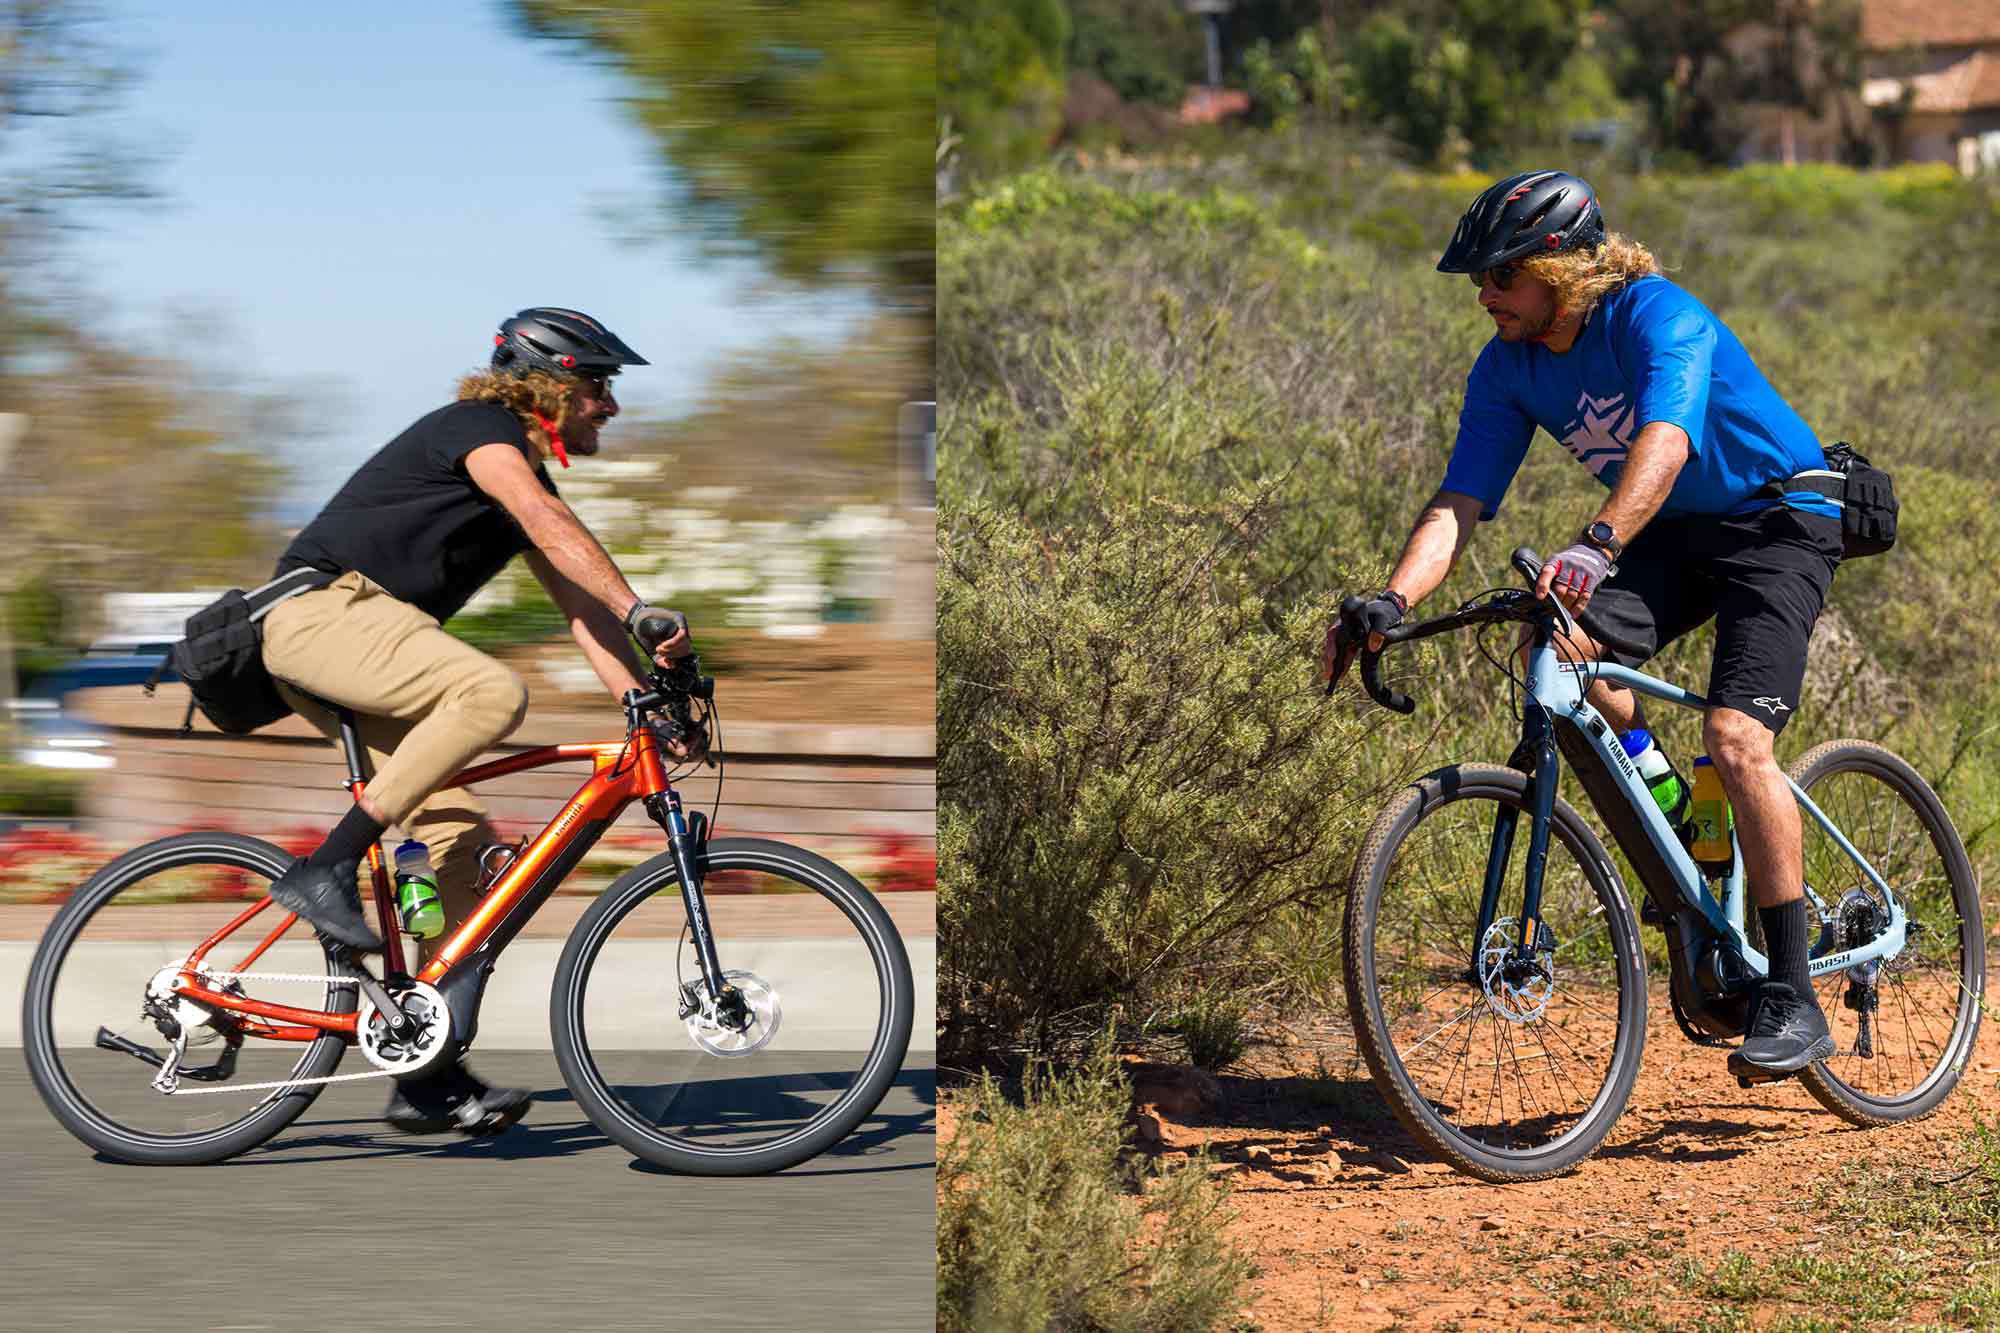 Yamaha Bicycles continues to massage its pedal-assist bicycles lineup for ‘22 with its improved Wabash RT gravel bike and CrossCore RC recreational all-arounder.